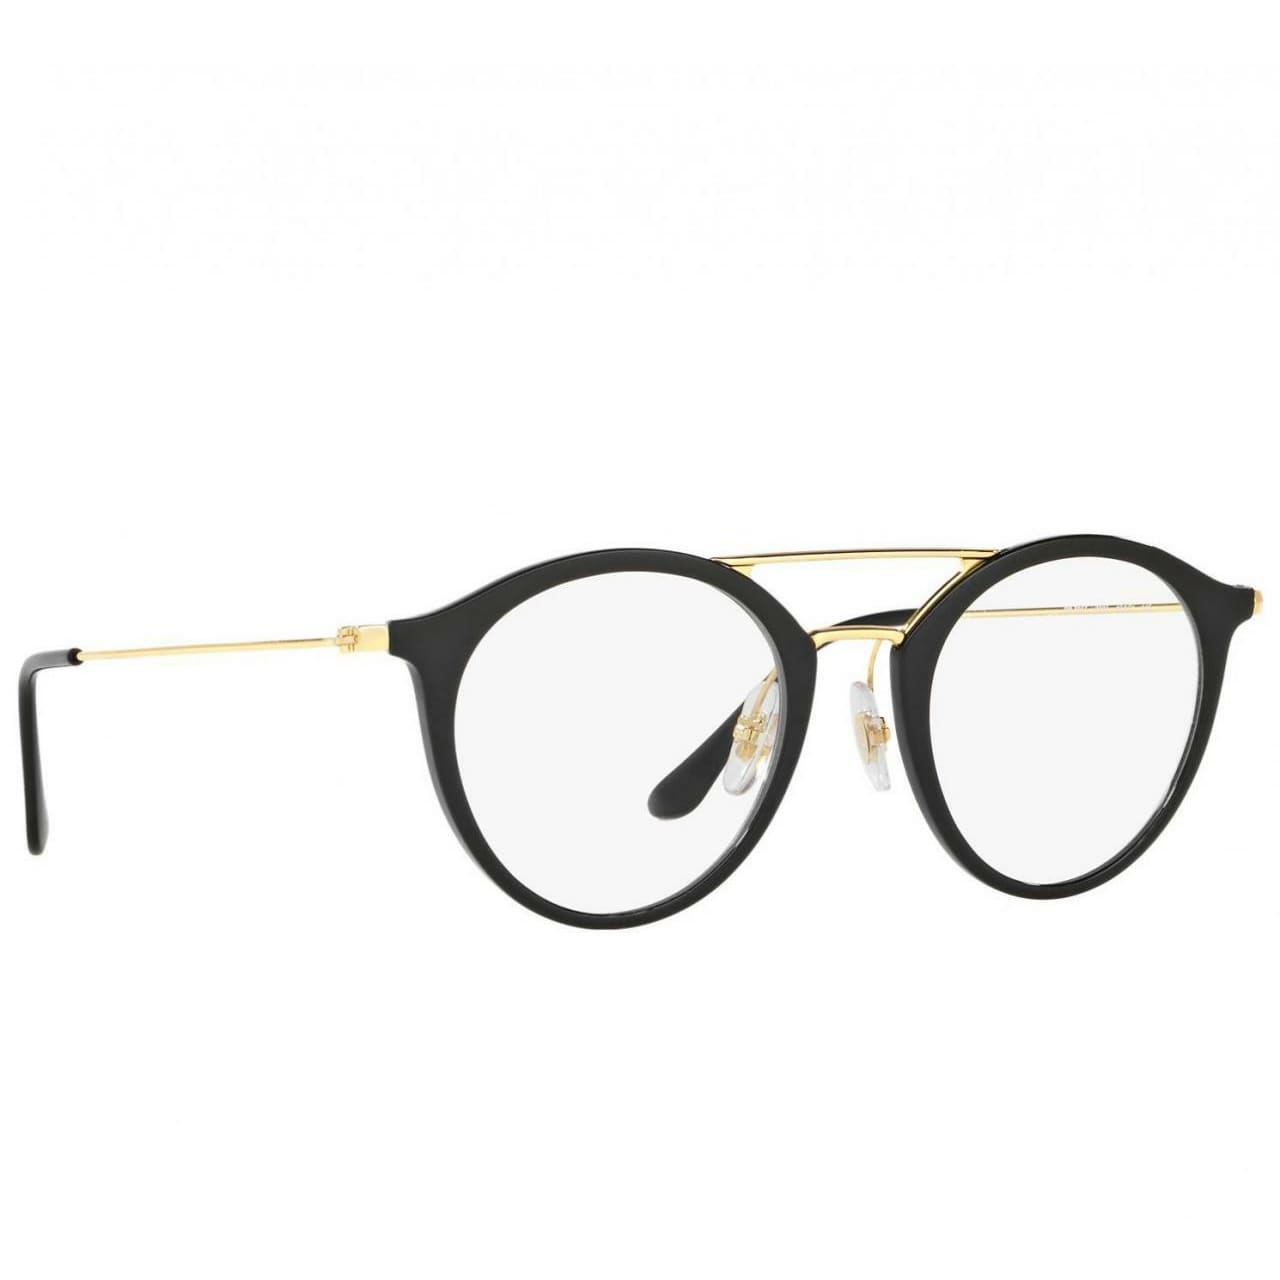 Ray-Ban RB7097-2000 Black Gold Round Injected Metal Eyeglasses Frames 8053672603613